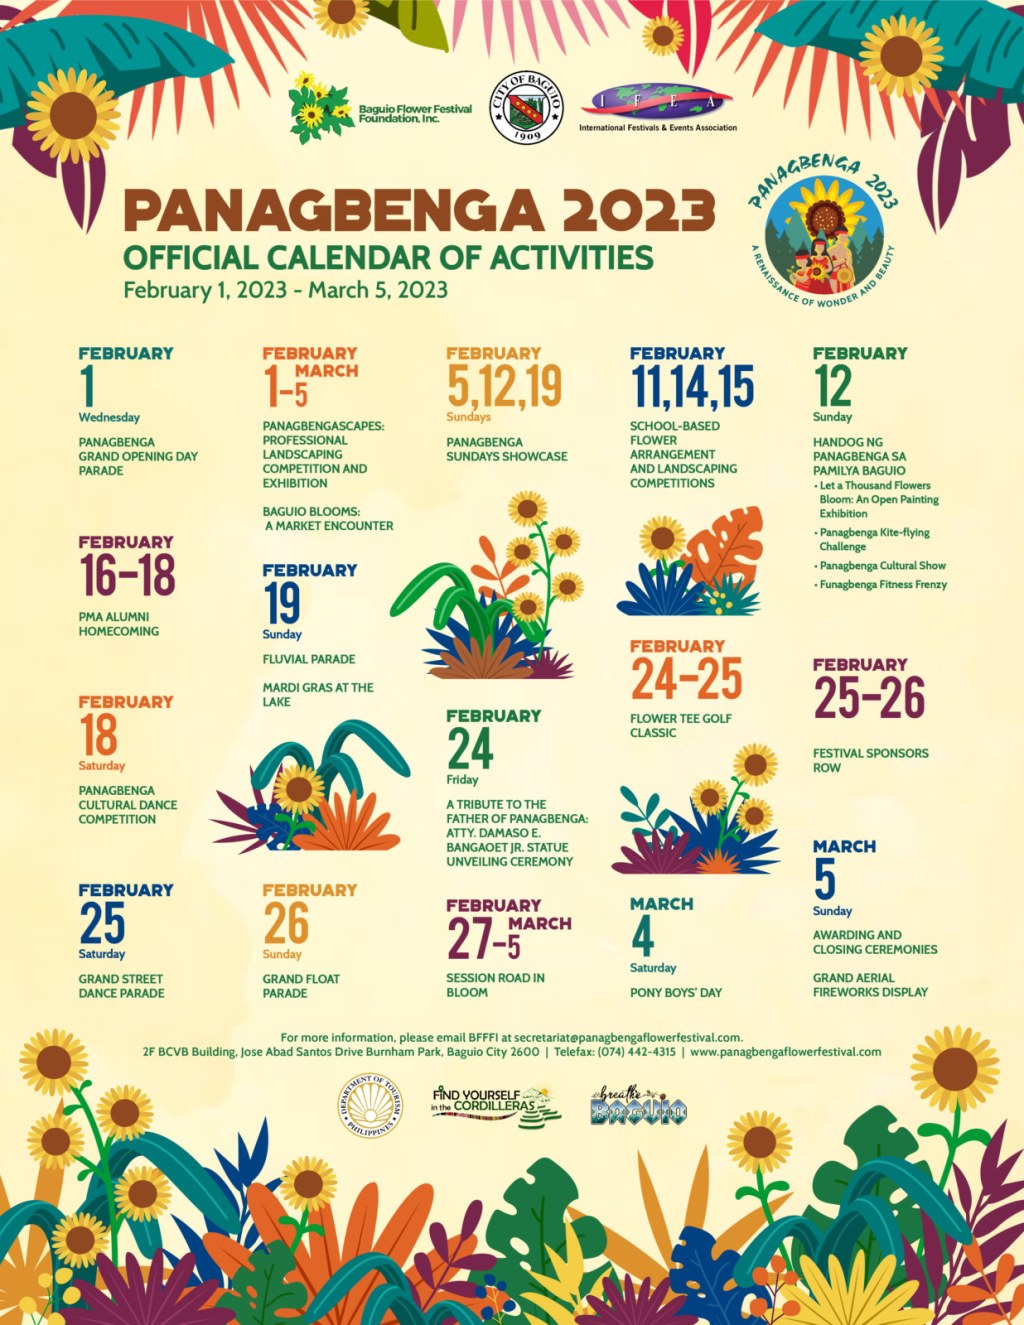 baguio trip itinerary 2023 - PANAGBENGA FESTIVAL  IN BAGUIO: Schedule of Activities, Things